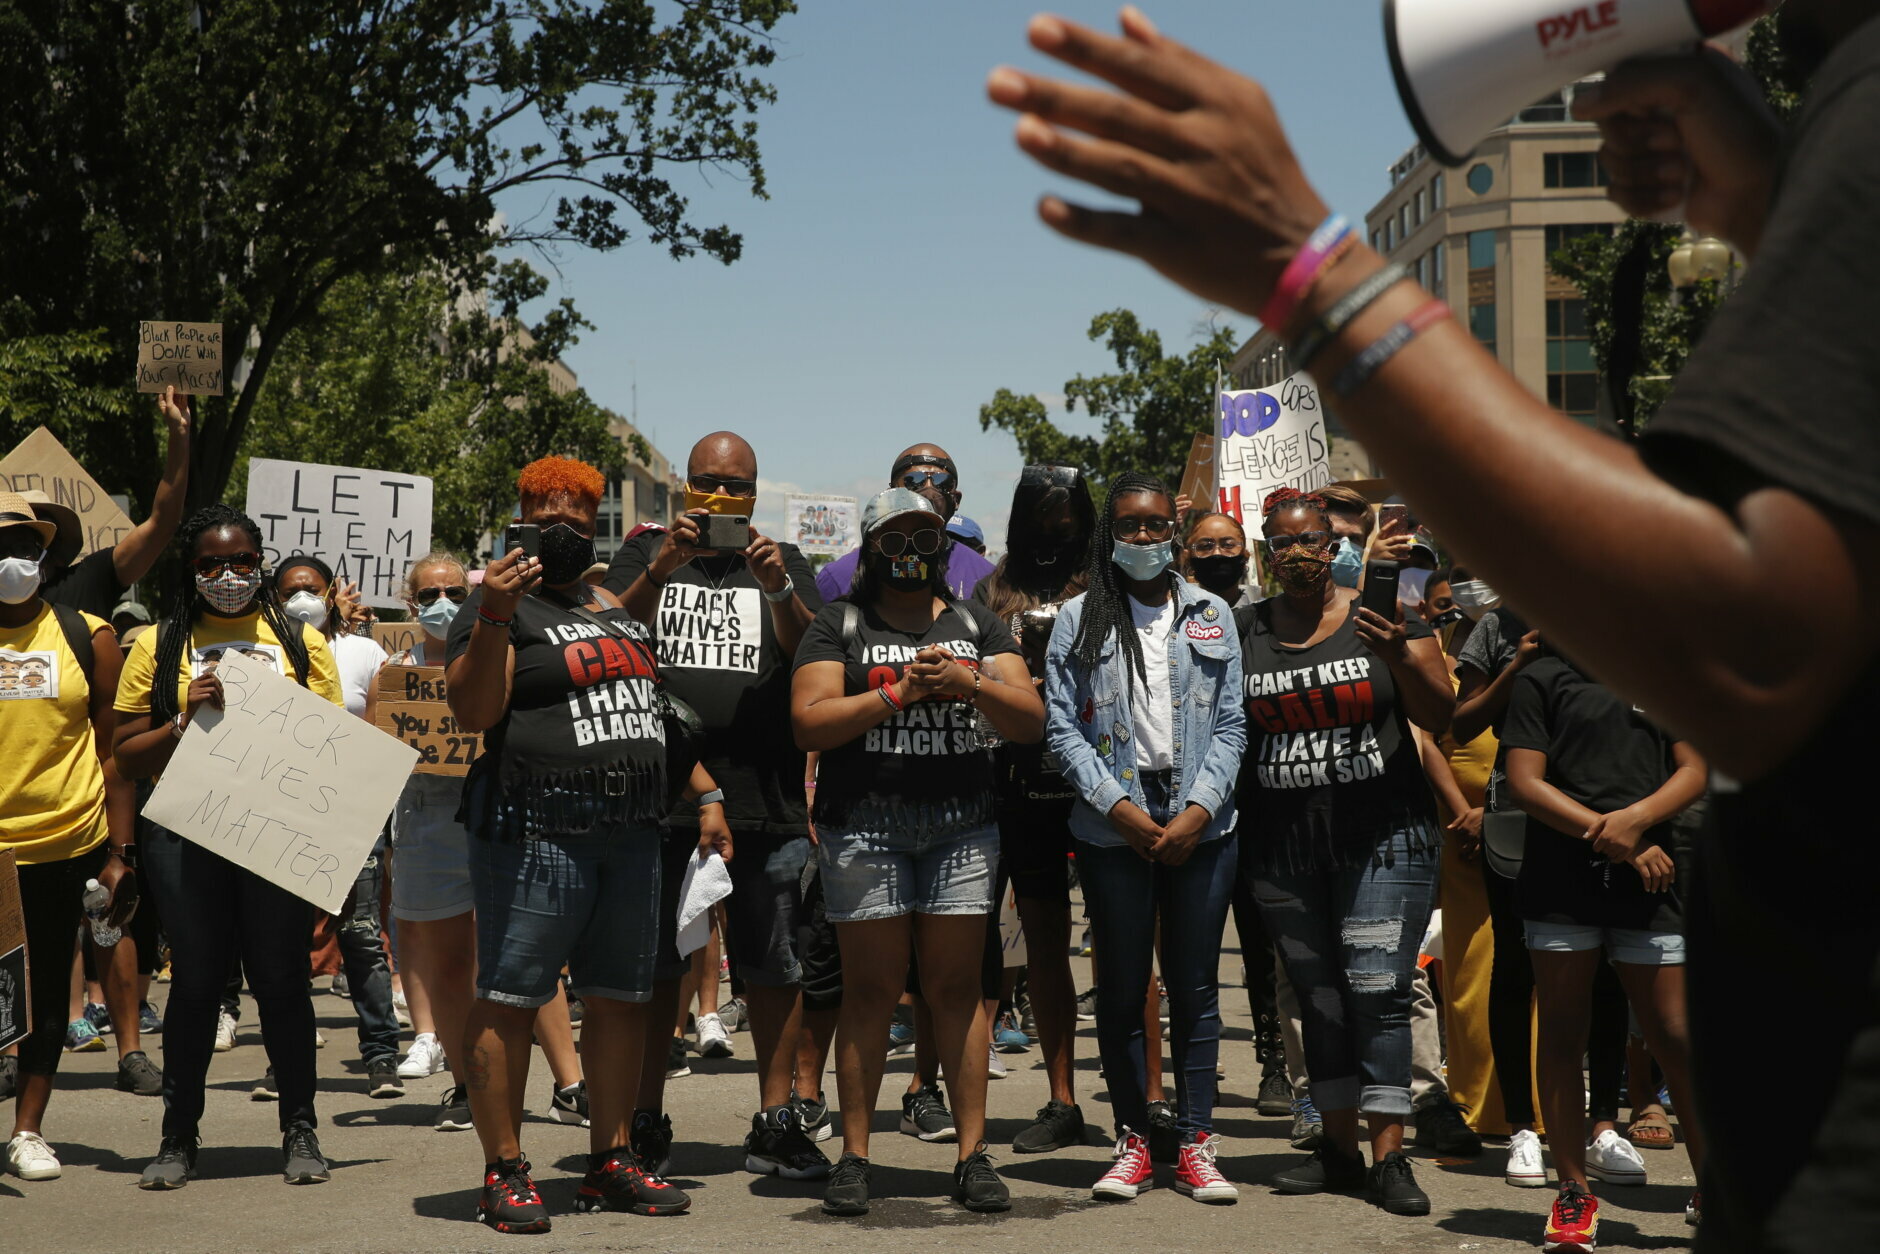 Demonstrators protest Sunday, June 7, 2020, near the White House in Washington, over the death of George Floyd, a black man who was in police custody in Minneapolis. Floyd died after being restrained by Minneapolis police officers on Memorial Day. (AP Photo/Maya Alleruzzo)